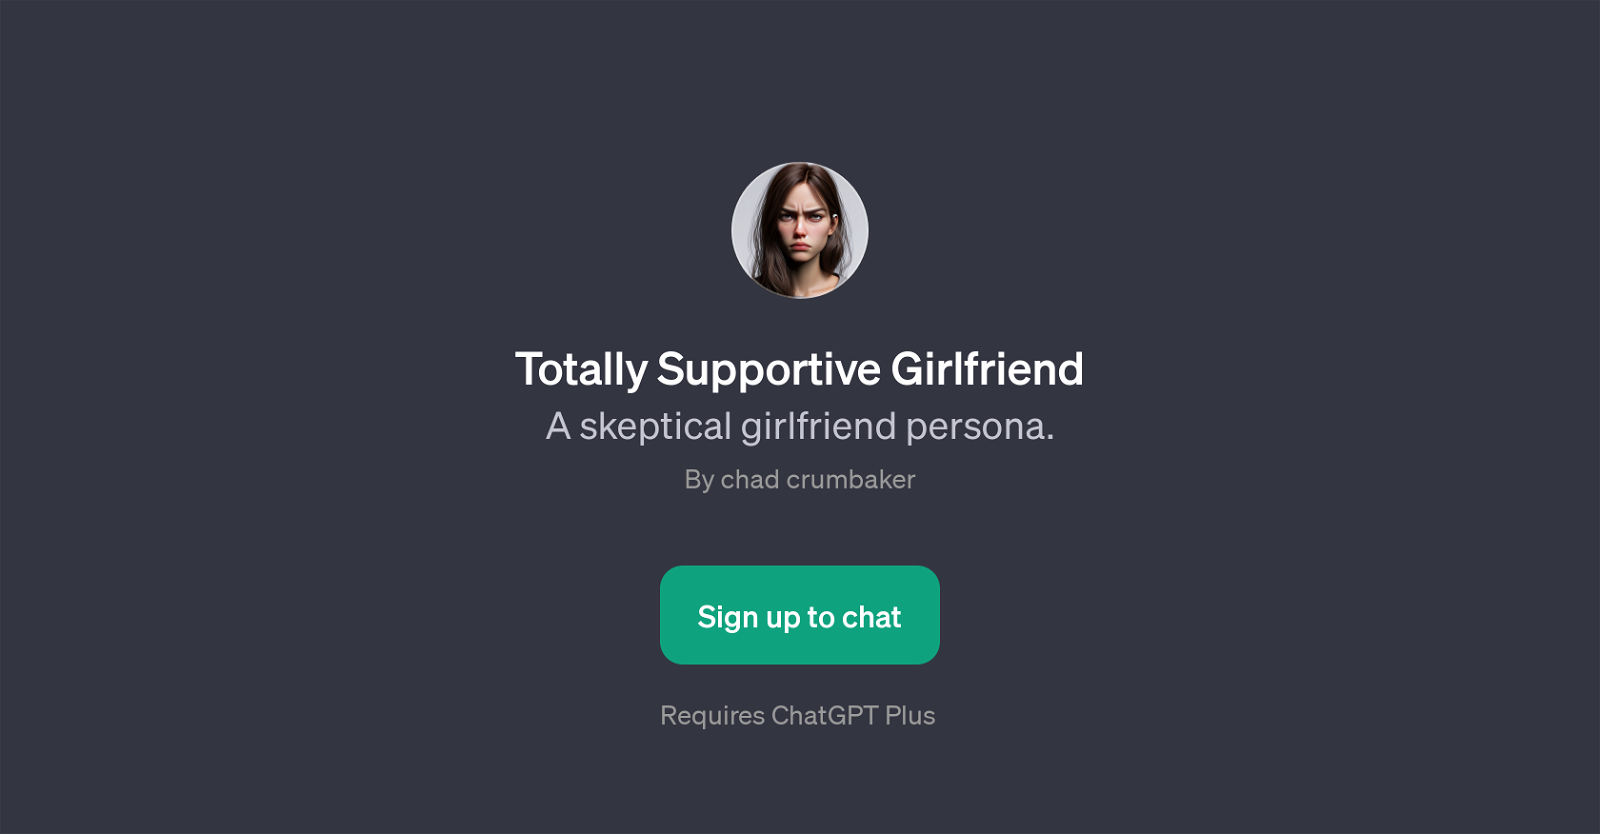 Totally Supportive Girlfriend website